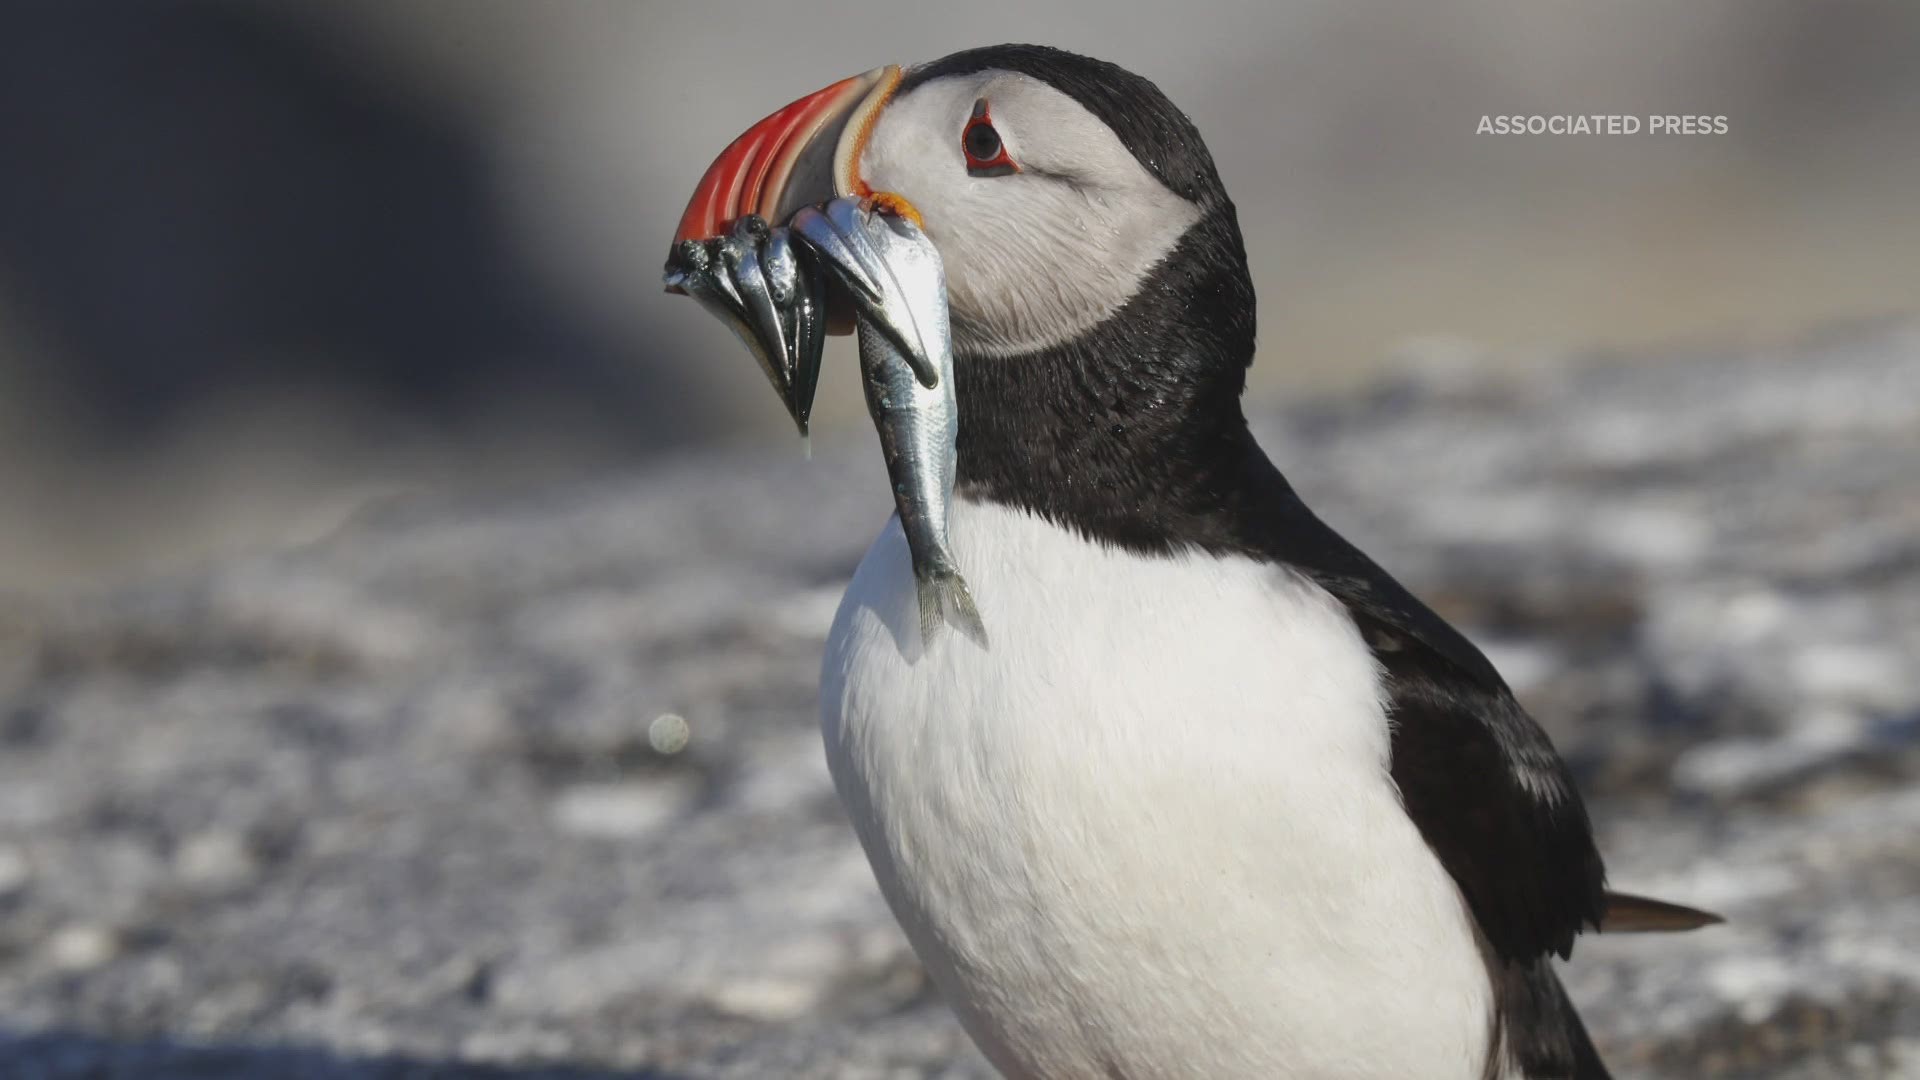 As the Gulf of Maine warms, puffins face new environmental challenges